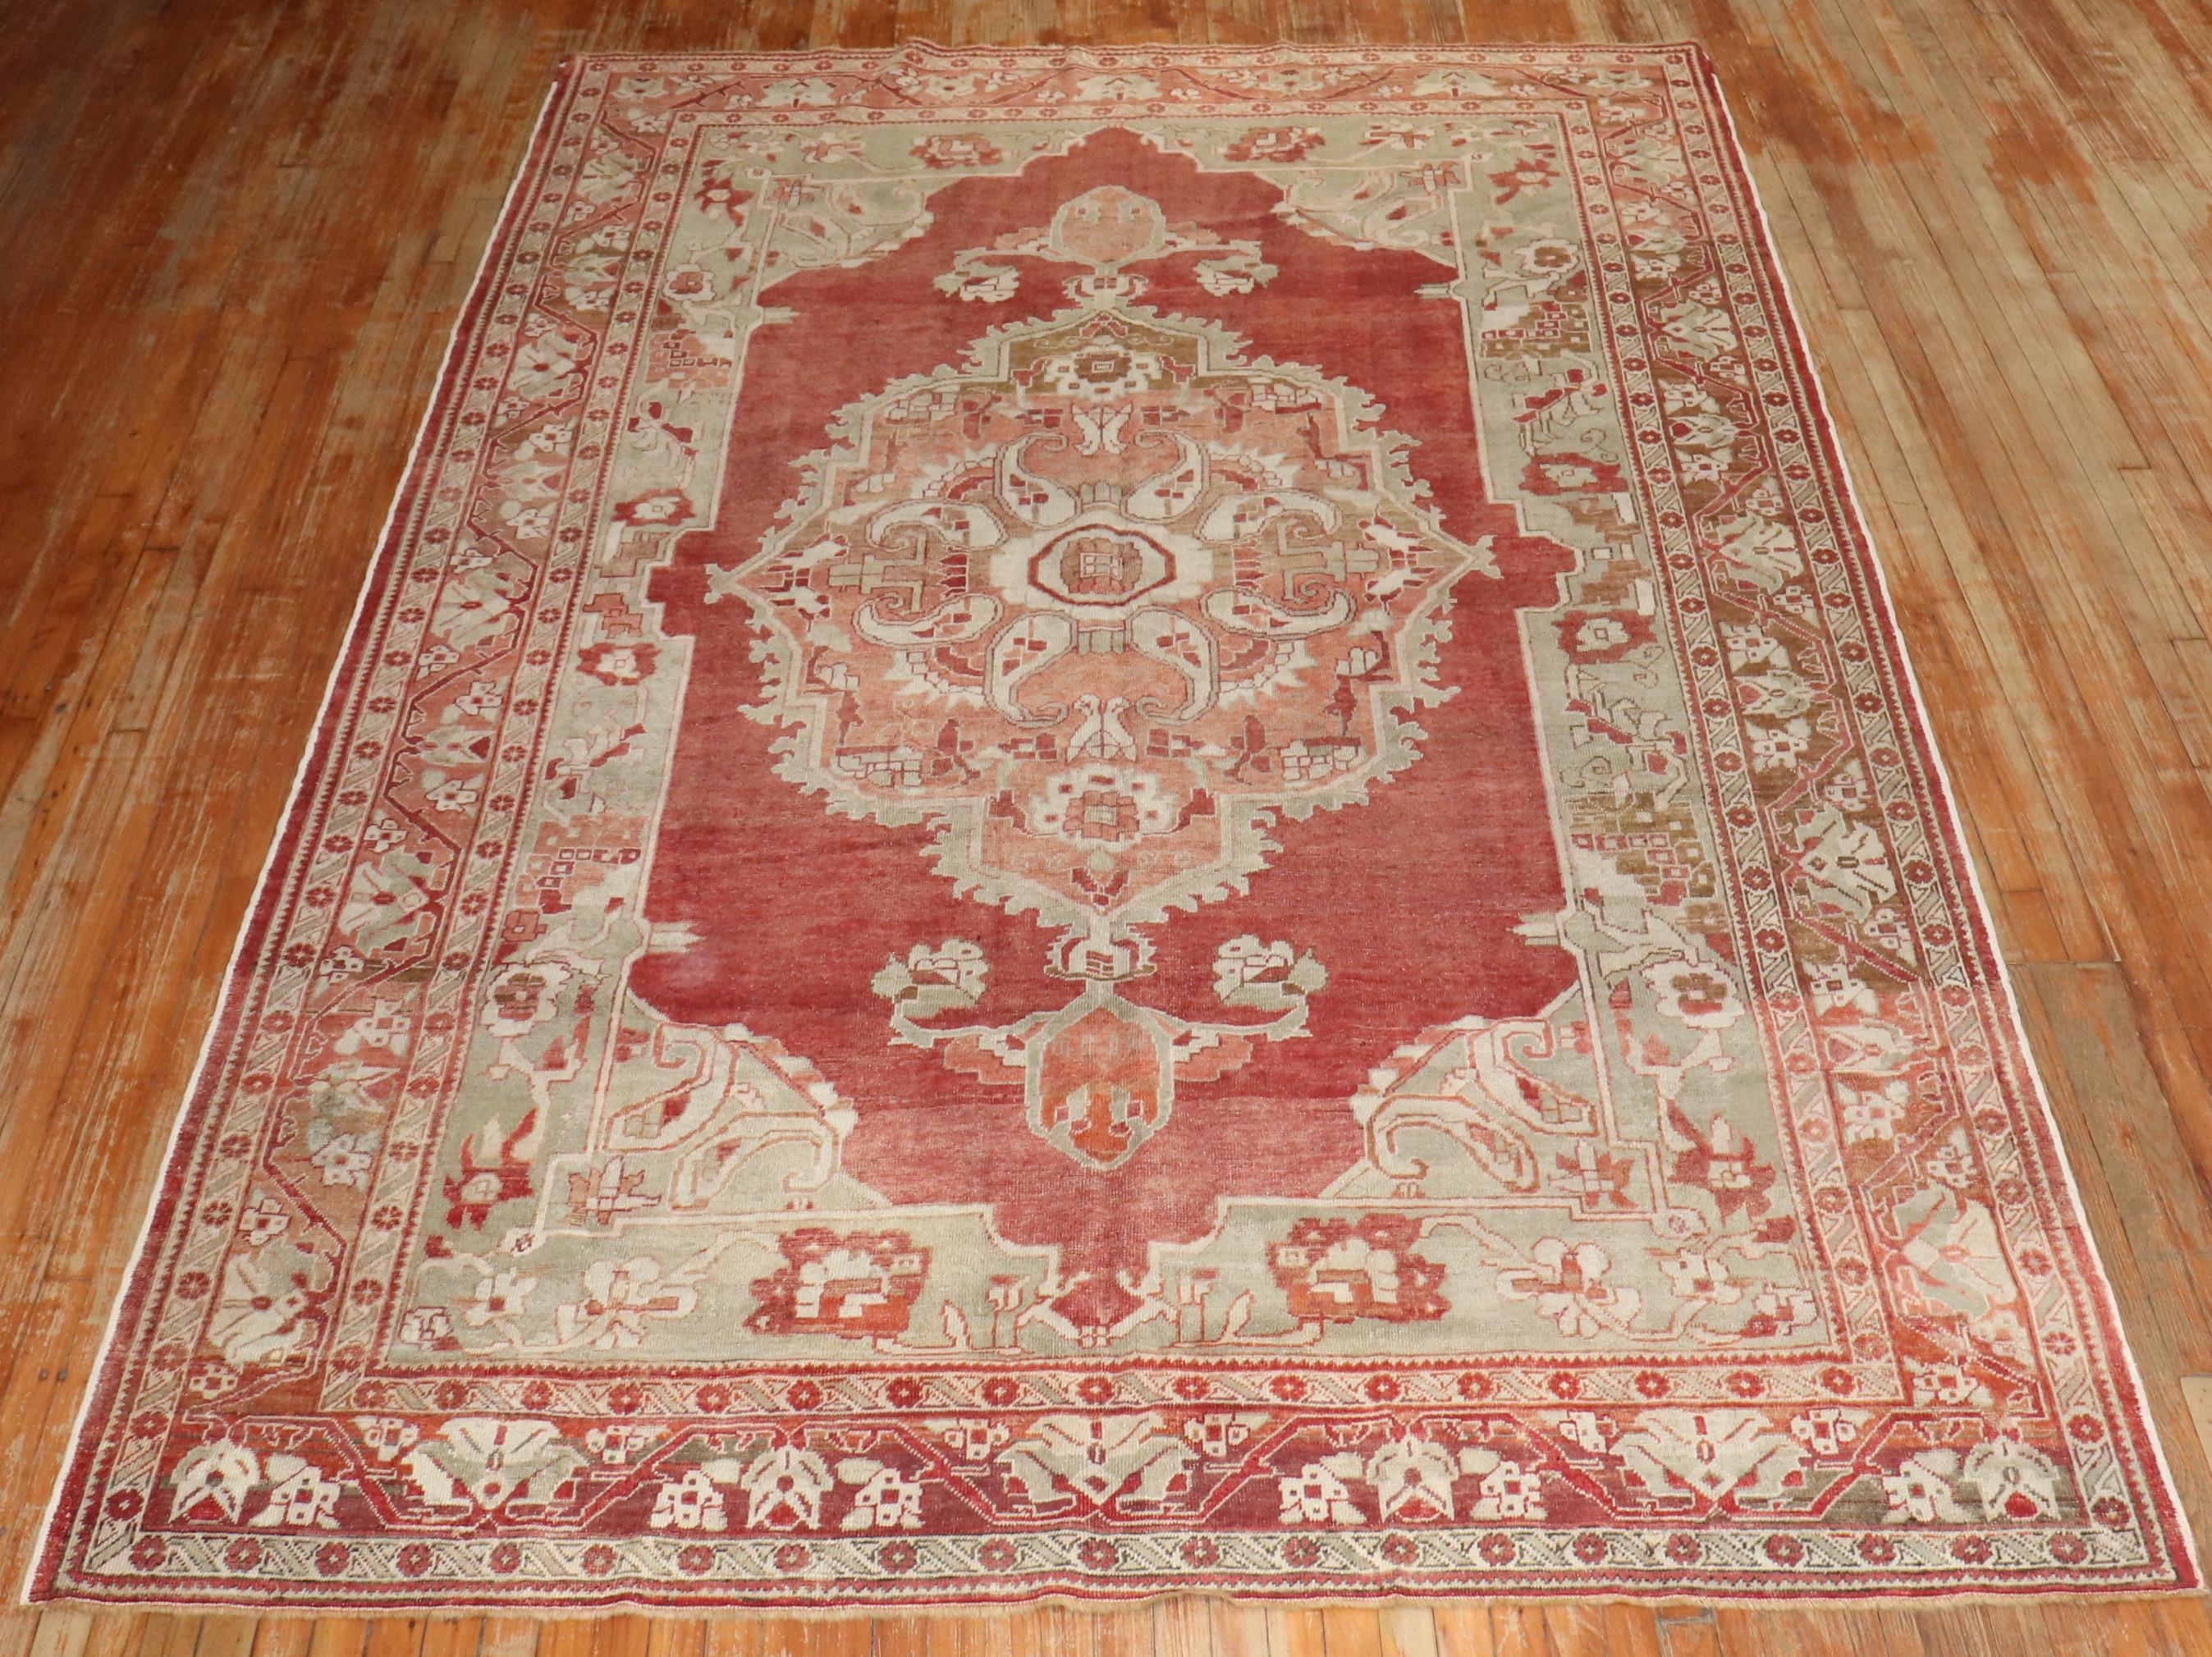 An antique Turkish rug from the early 20th century in a room-size format. 

Measures: 7'7'' x 11'6''.